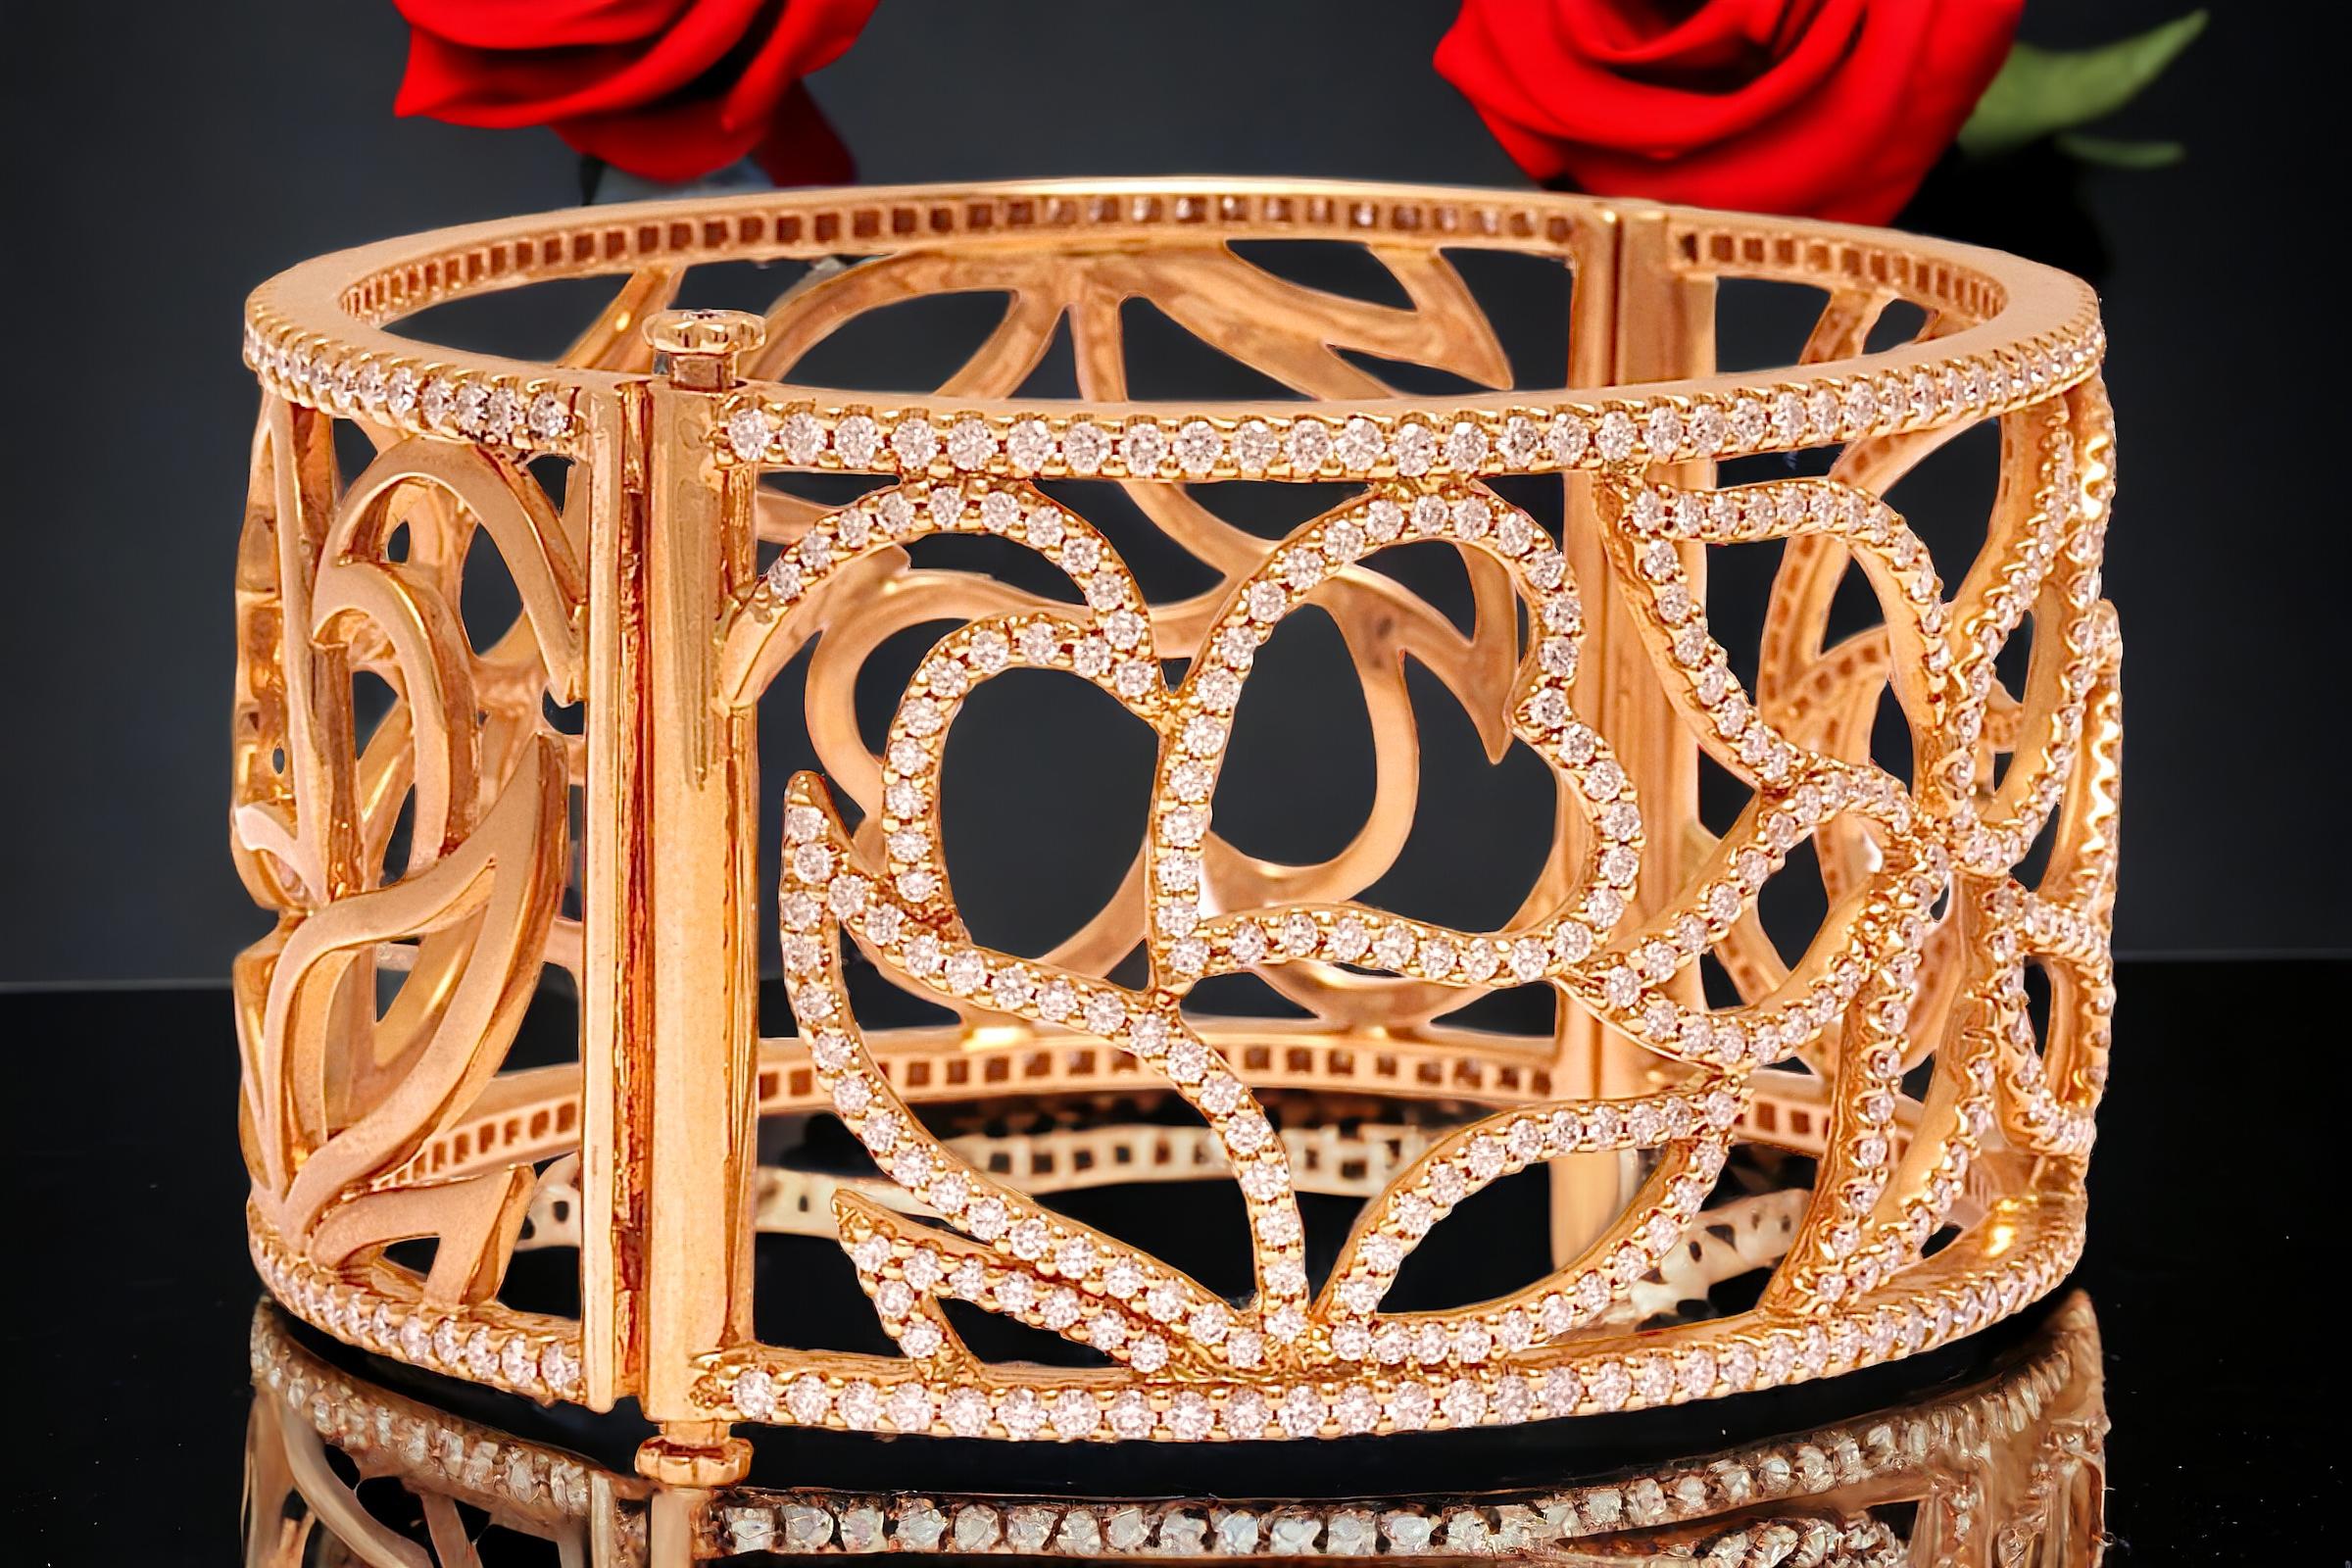 18kt Pink Gold Cuff Bracelet, Flower Design, set with 5.87 ct. Diamonds, 2 Sided In New Condition For Sale In Antwerp, BE